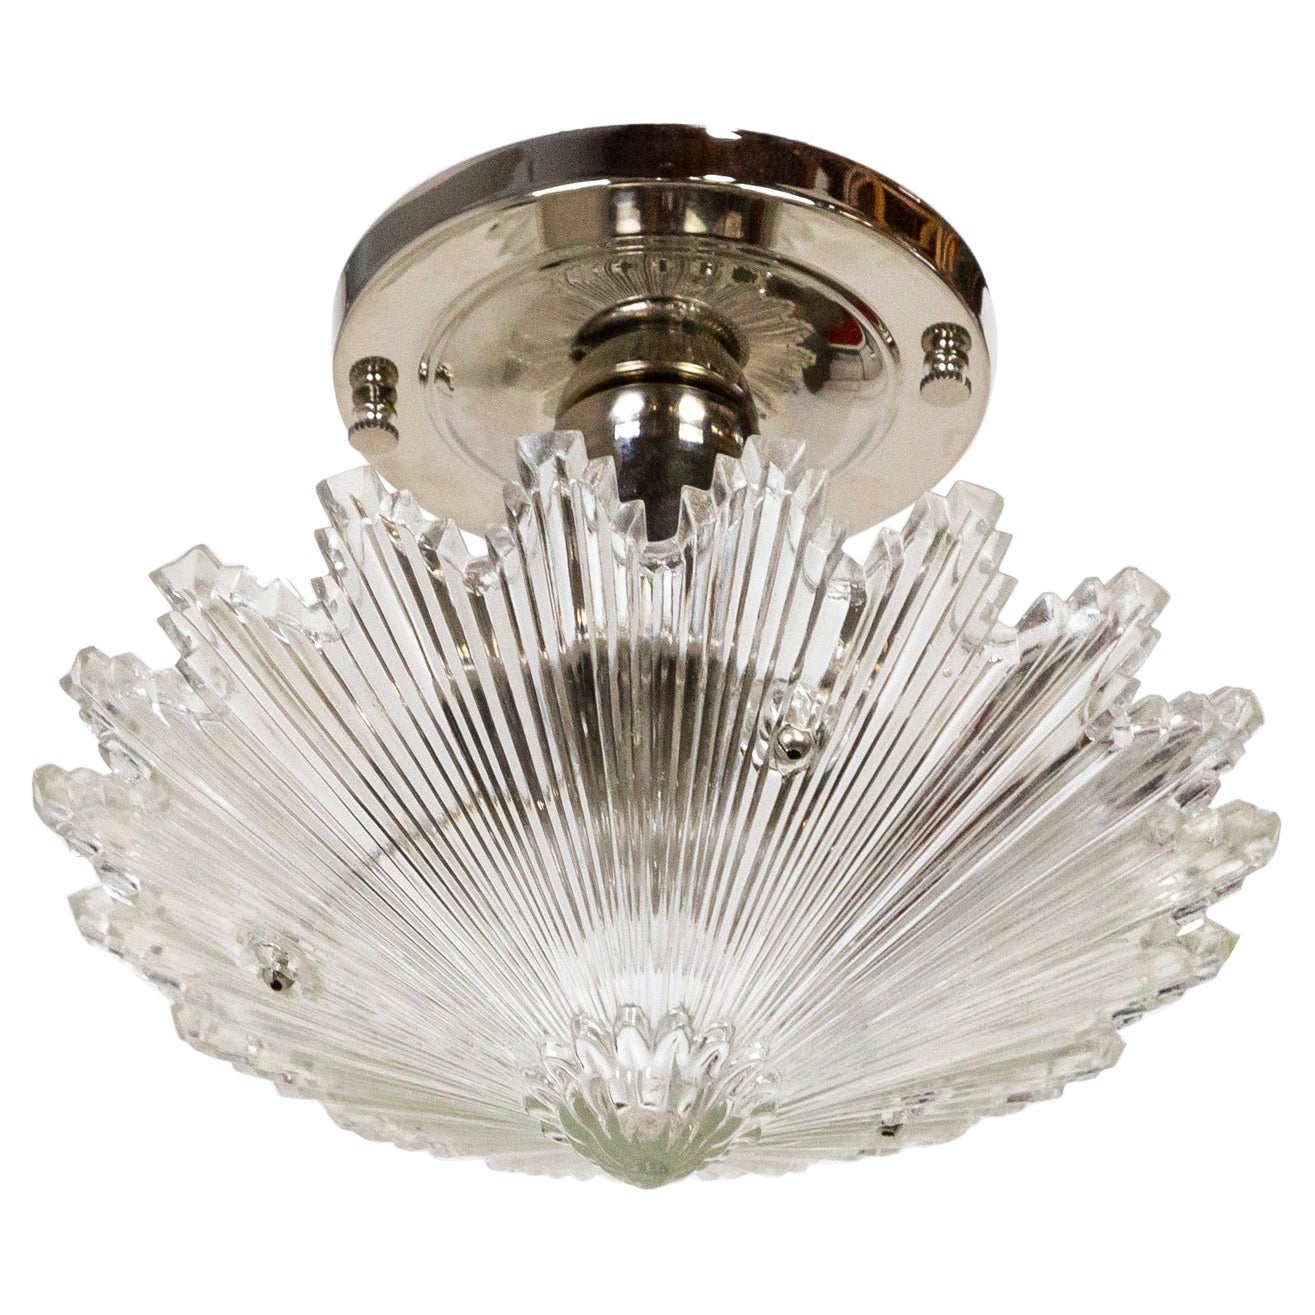 Deco Radial Ribbed Molded Glass Star Light Fixture W/ Chrome Mount 3 Available